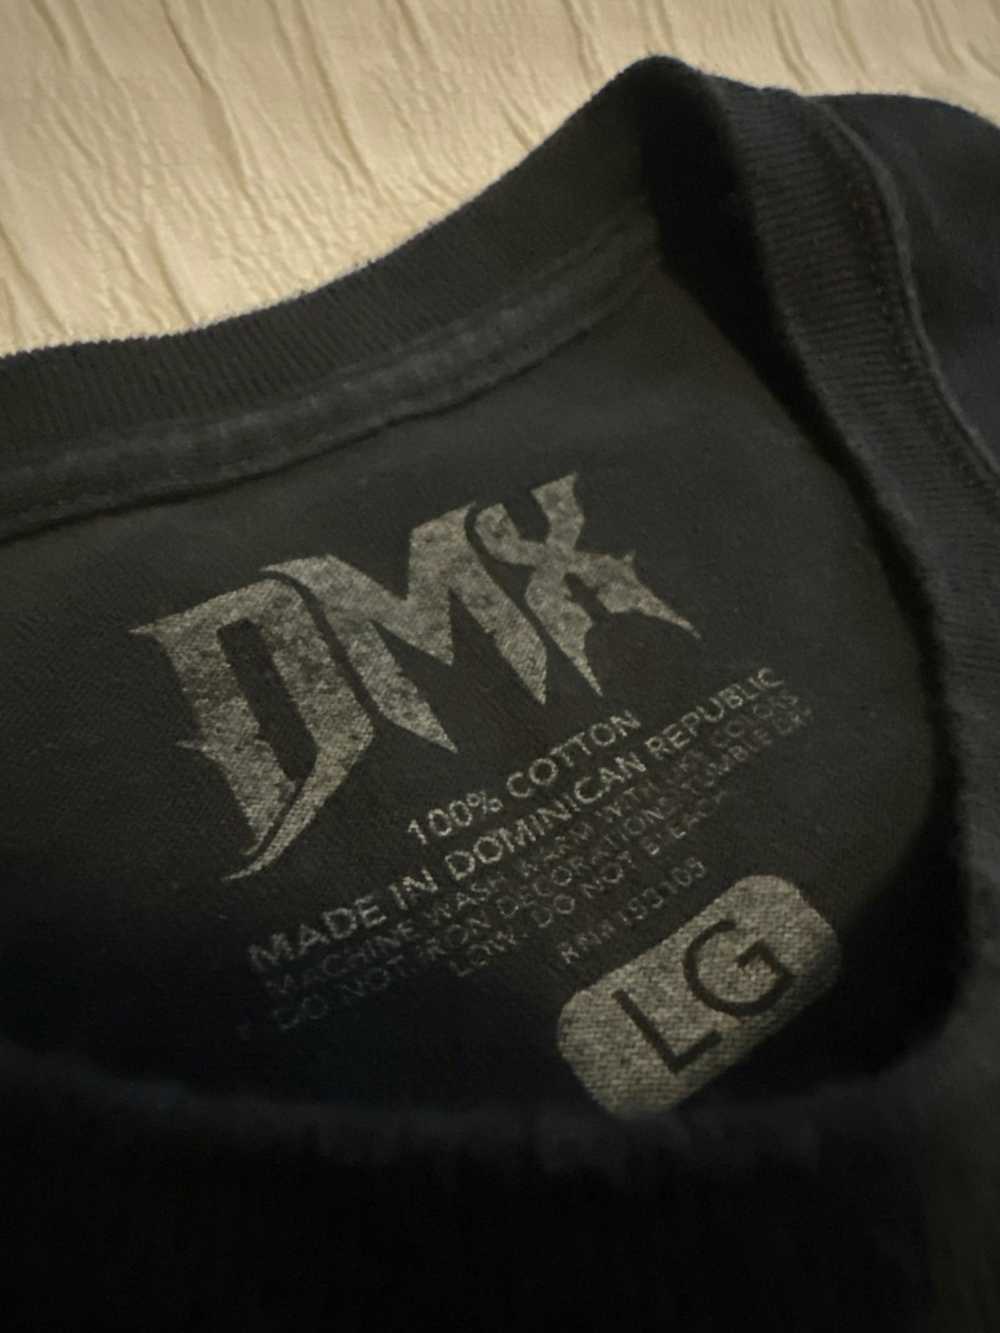 Other DMX graphic Tee - image 2